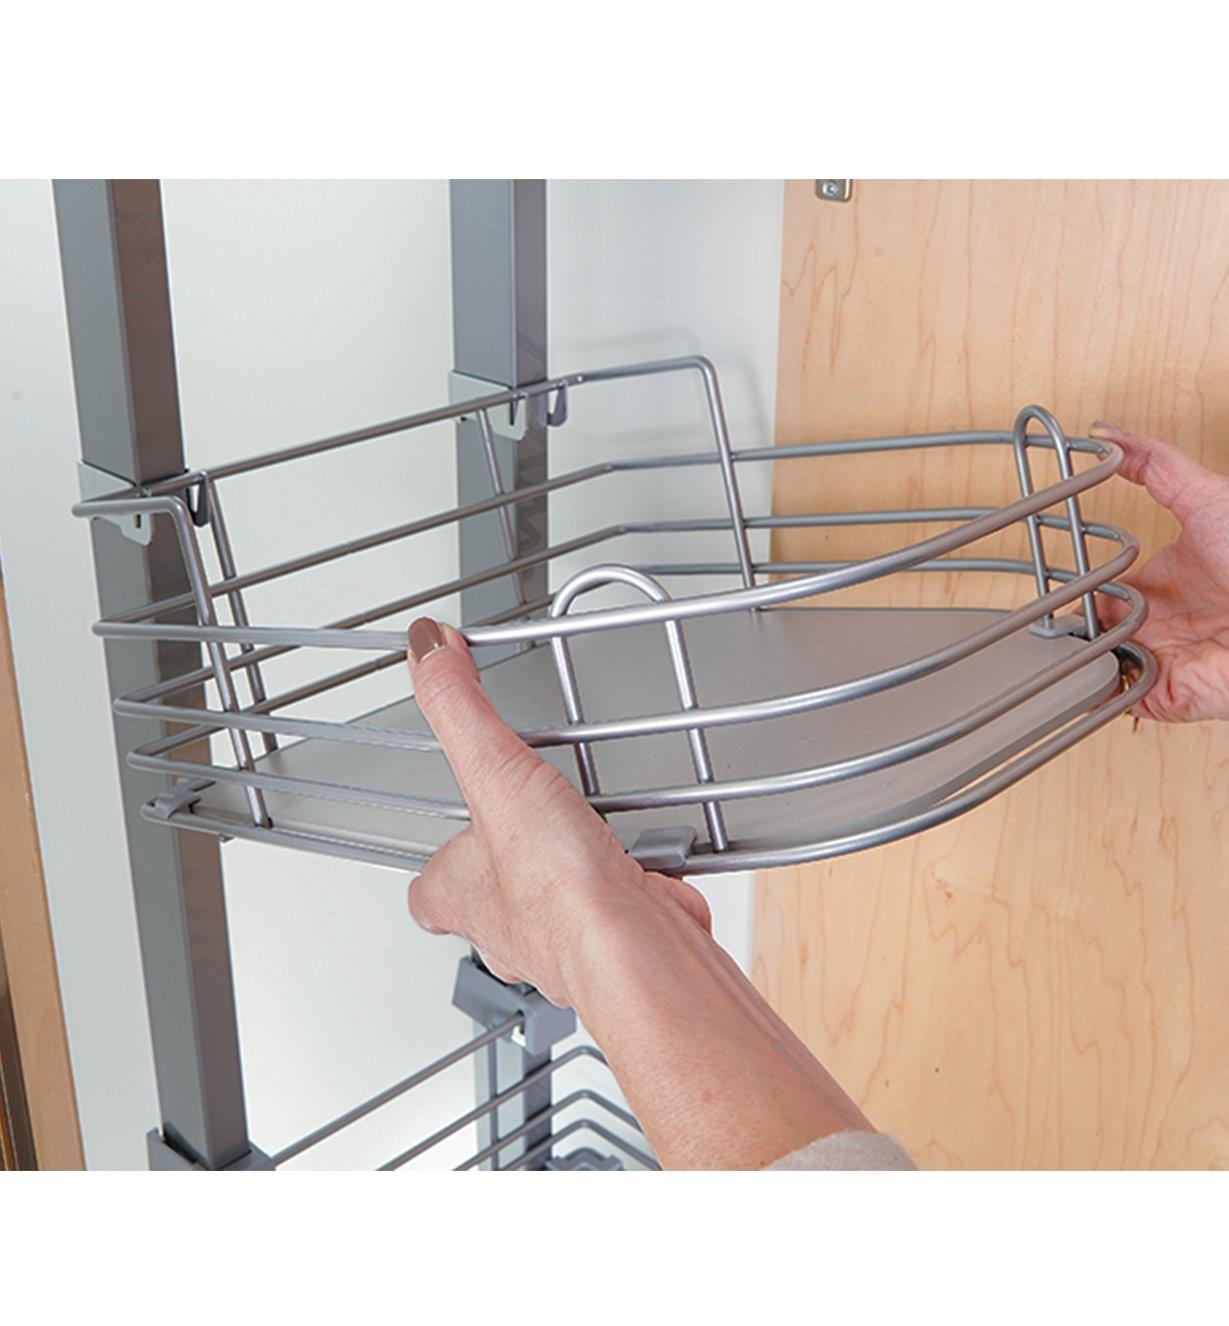 Adjusting the height of a shelf in the pantry unit